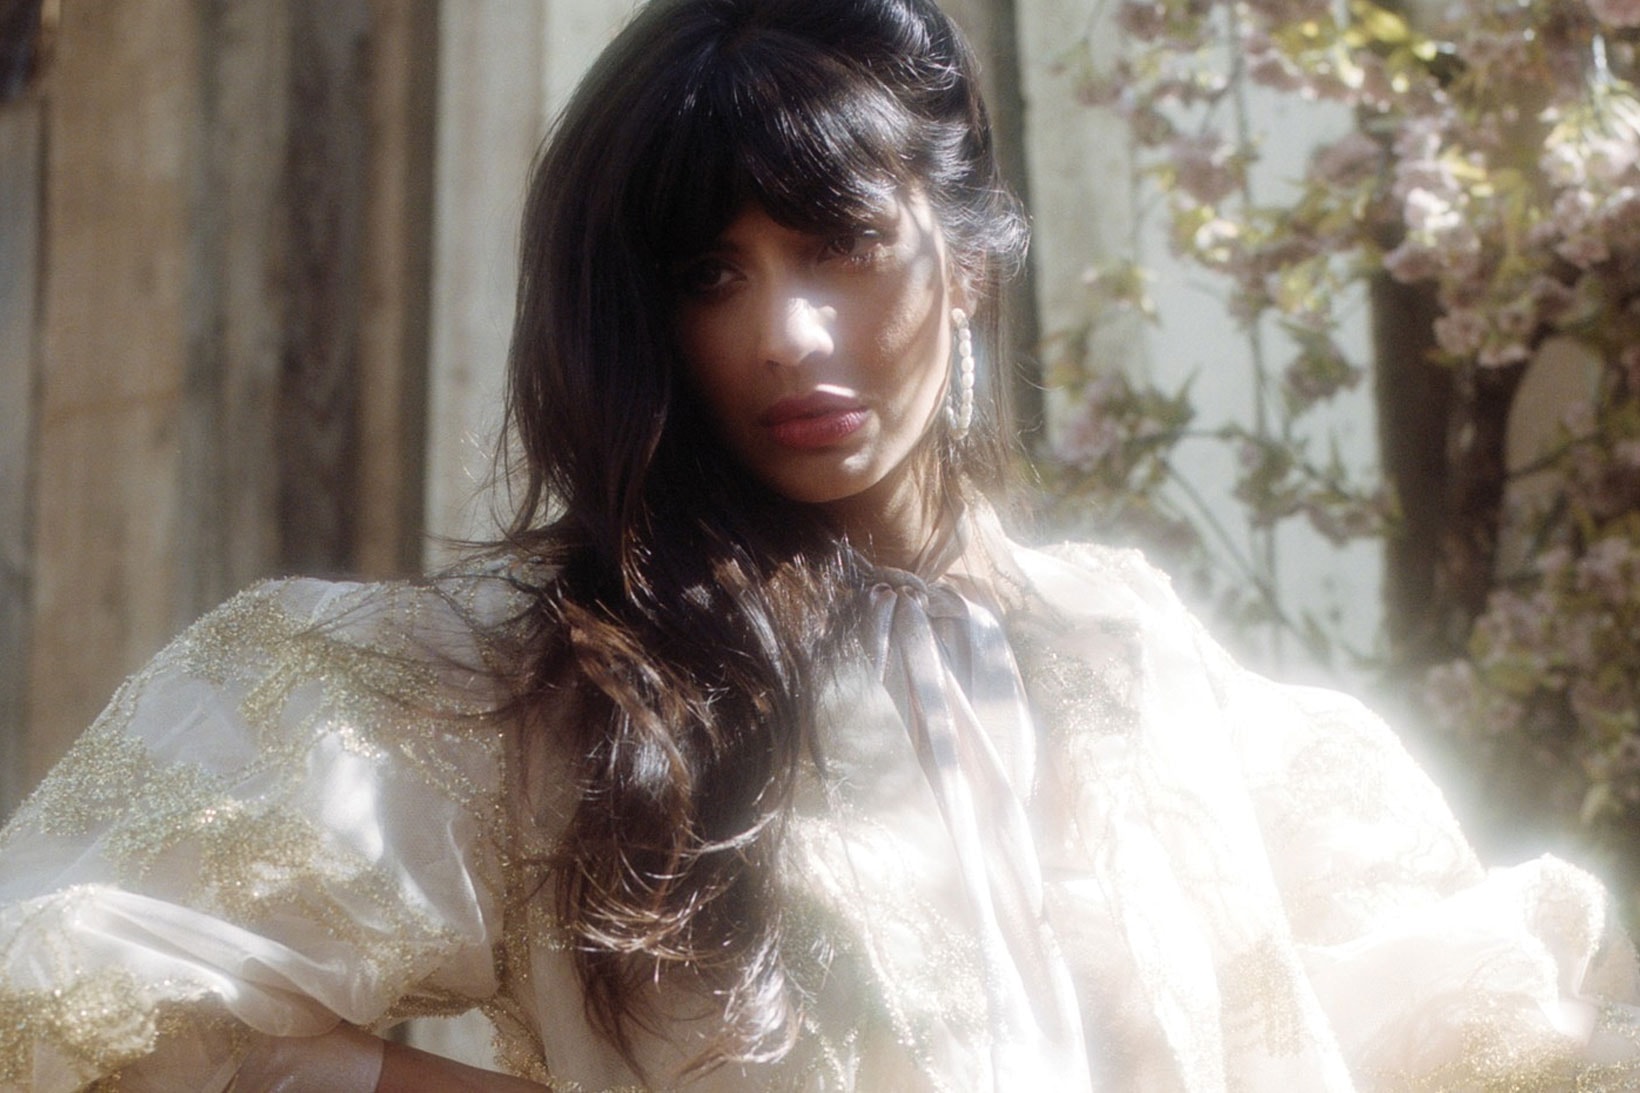 jameela jamil comes out queer lgbtq twitter hbo max legendary backlash 